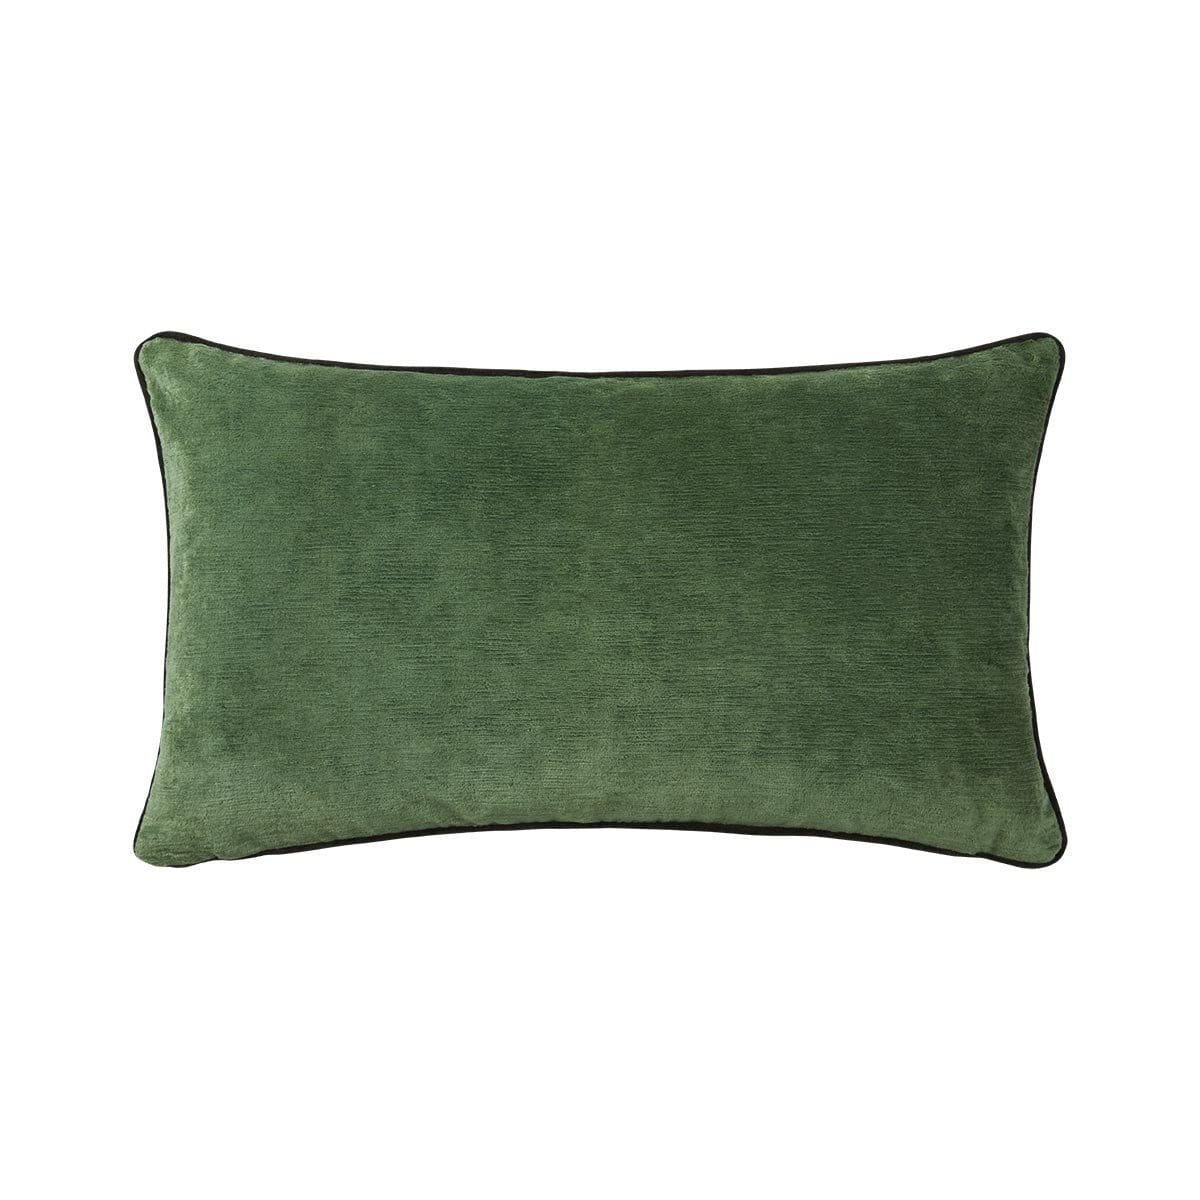 Decorative Pillows Iosis Boromée Decorative Pillow by Yves Delorme Menthe / 13 x 22 in Yves Delorme